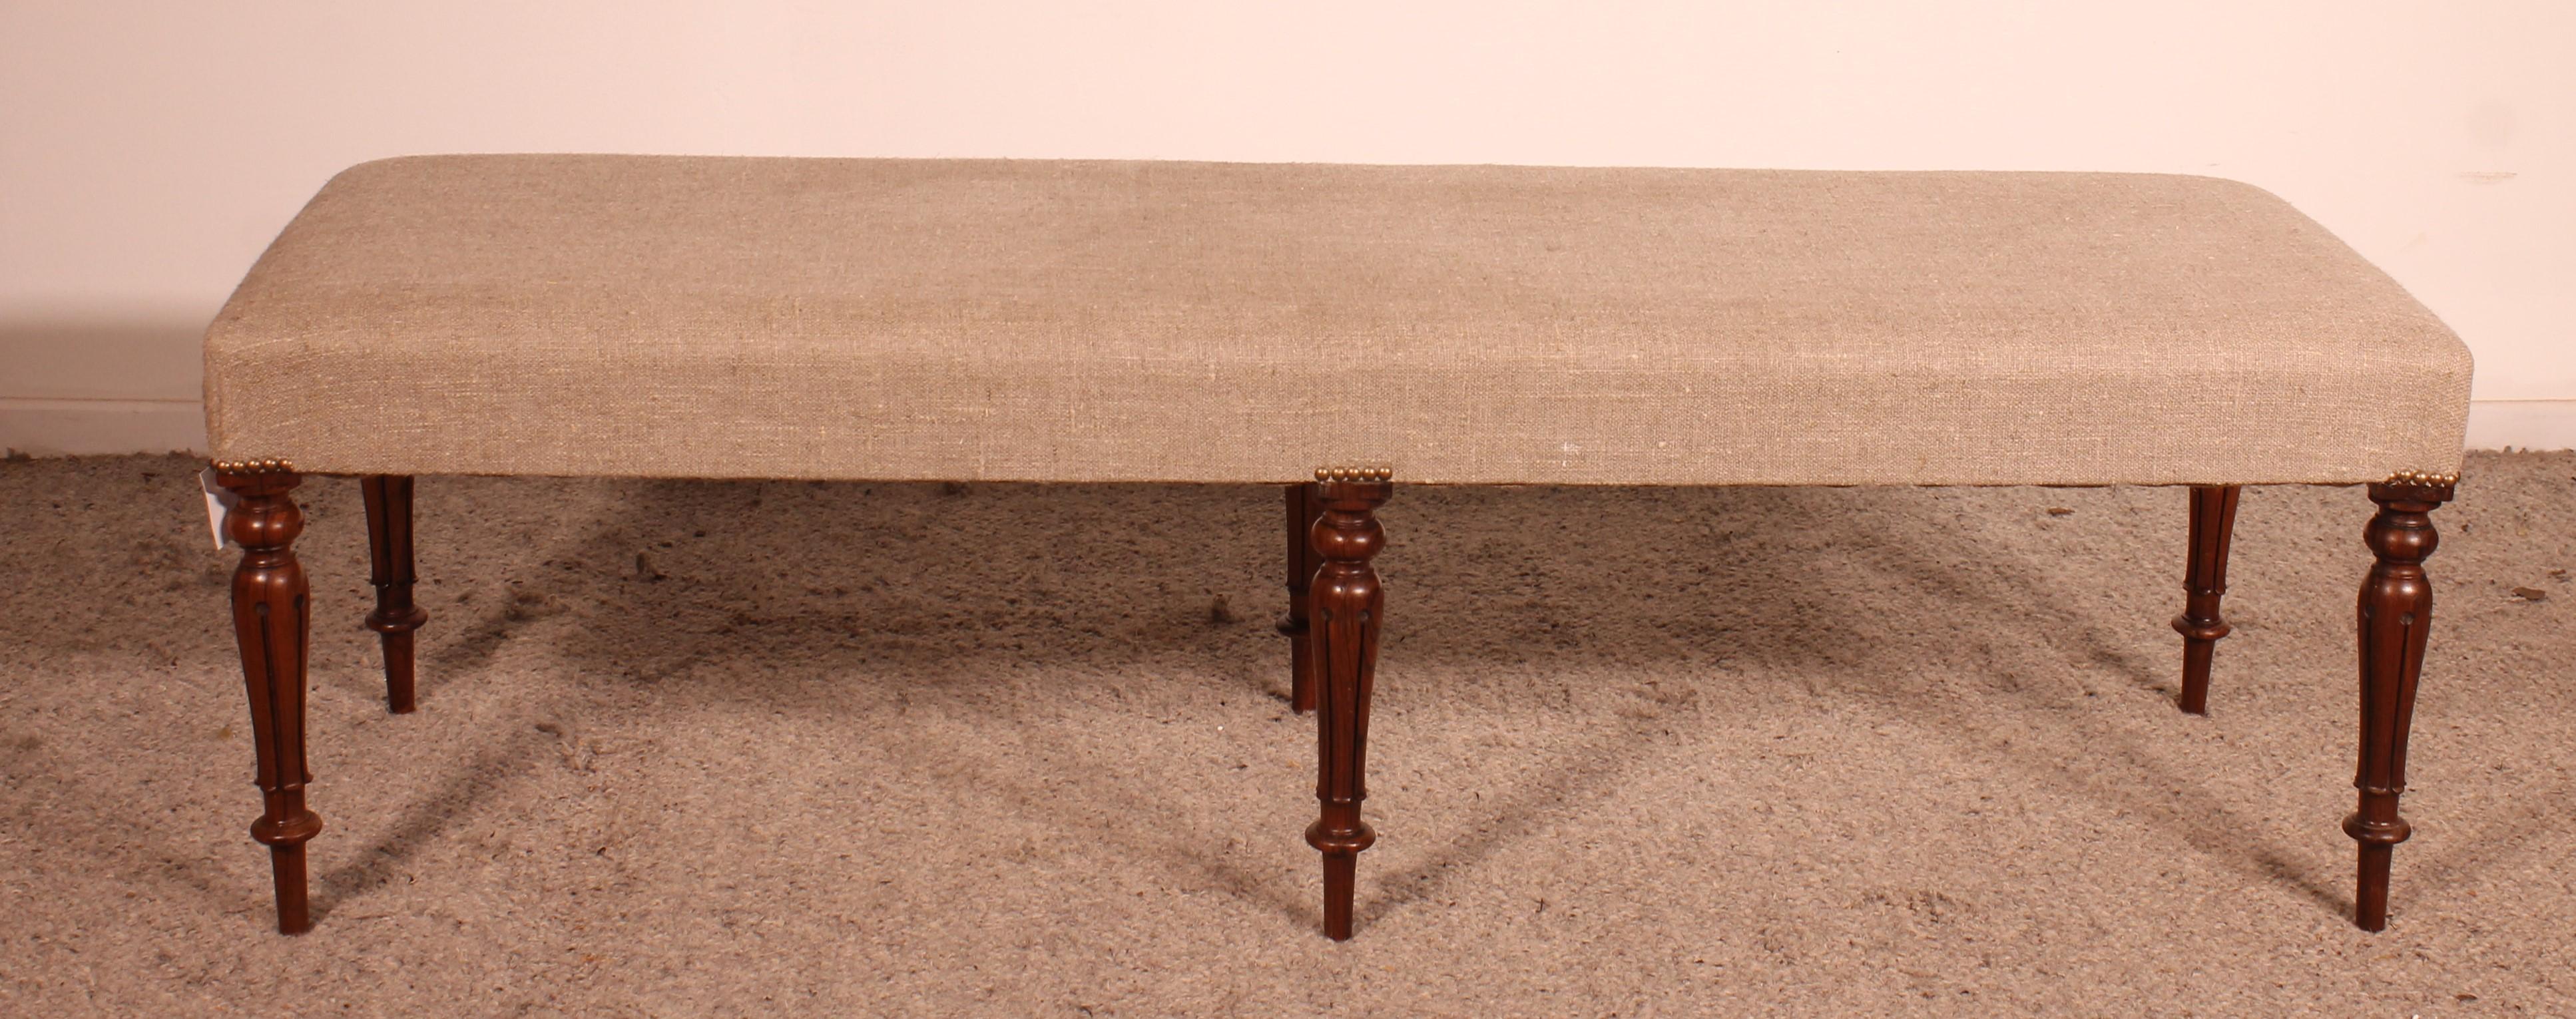 6 Feet Walnut Bench From The 19th Century For Sale 4